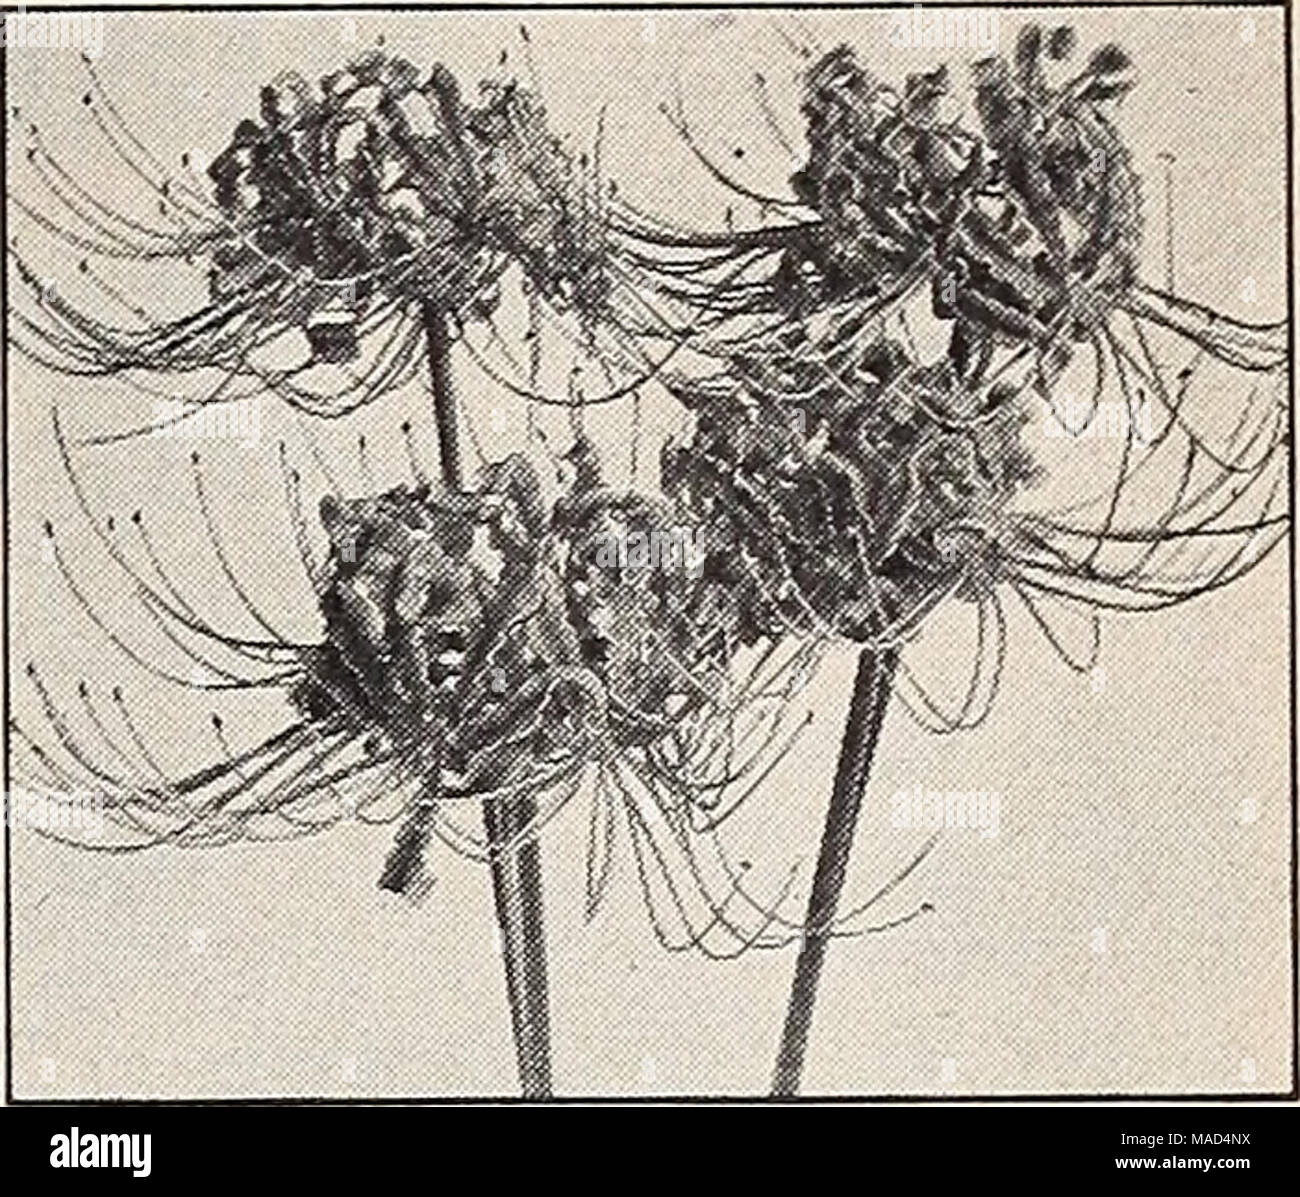 . Dreer's wholesale catalog for florists and market gardeners : autumn 1940 edition . Leucocoryne ixioides odorata Lycoris radiata Lachenalia pendula superba Lachenalia—Cape Cowslip Feudula superba. An interesting and attractive bulbous plant from South Africa. Has pendulous firecracker- like brilliant coral-red blooms tipped with green and purple. Splendid for indoor growing. Culture same as for Freesias. $1.50 per dozen; $10.00 per 100. Leucocoryne ixioides odorata Glory of the Sun An excellent bulbous plant for growing in the green- house requiring the same cultural treatment as Freesias. H Stock Photo